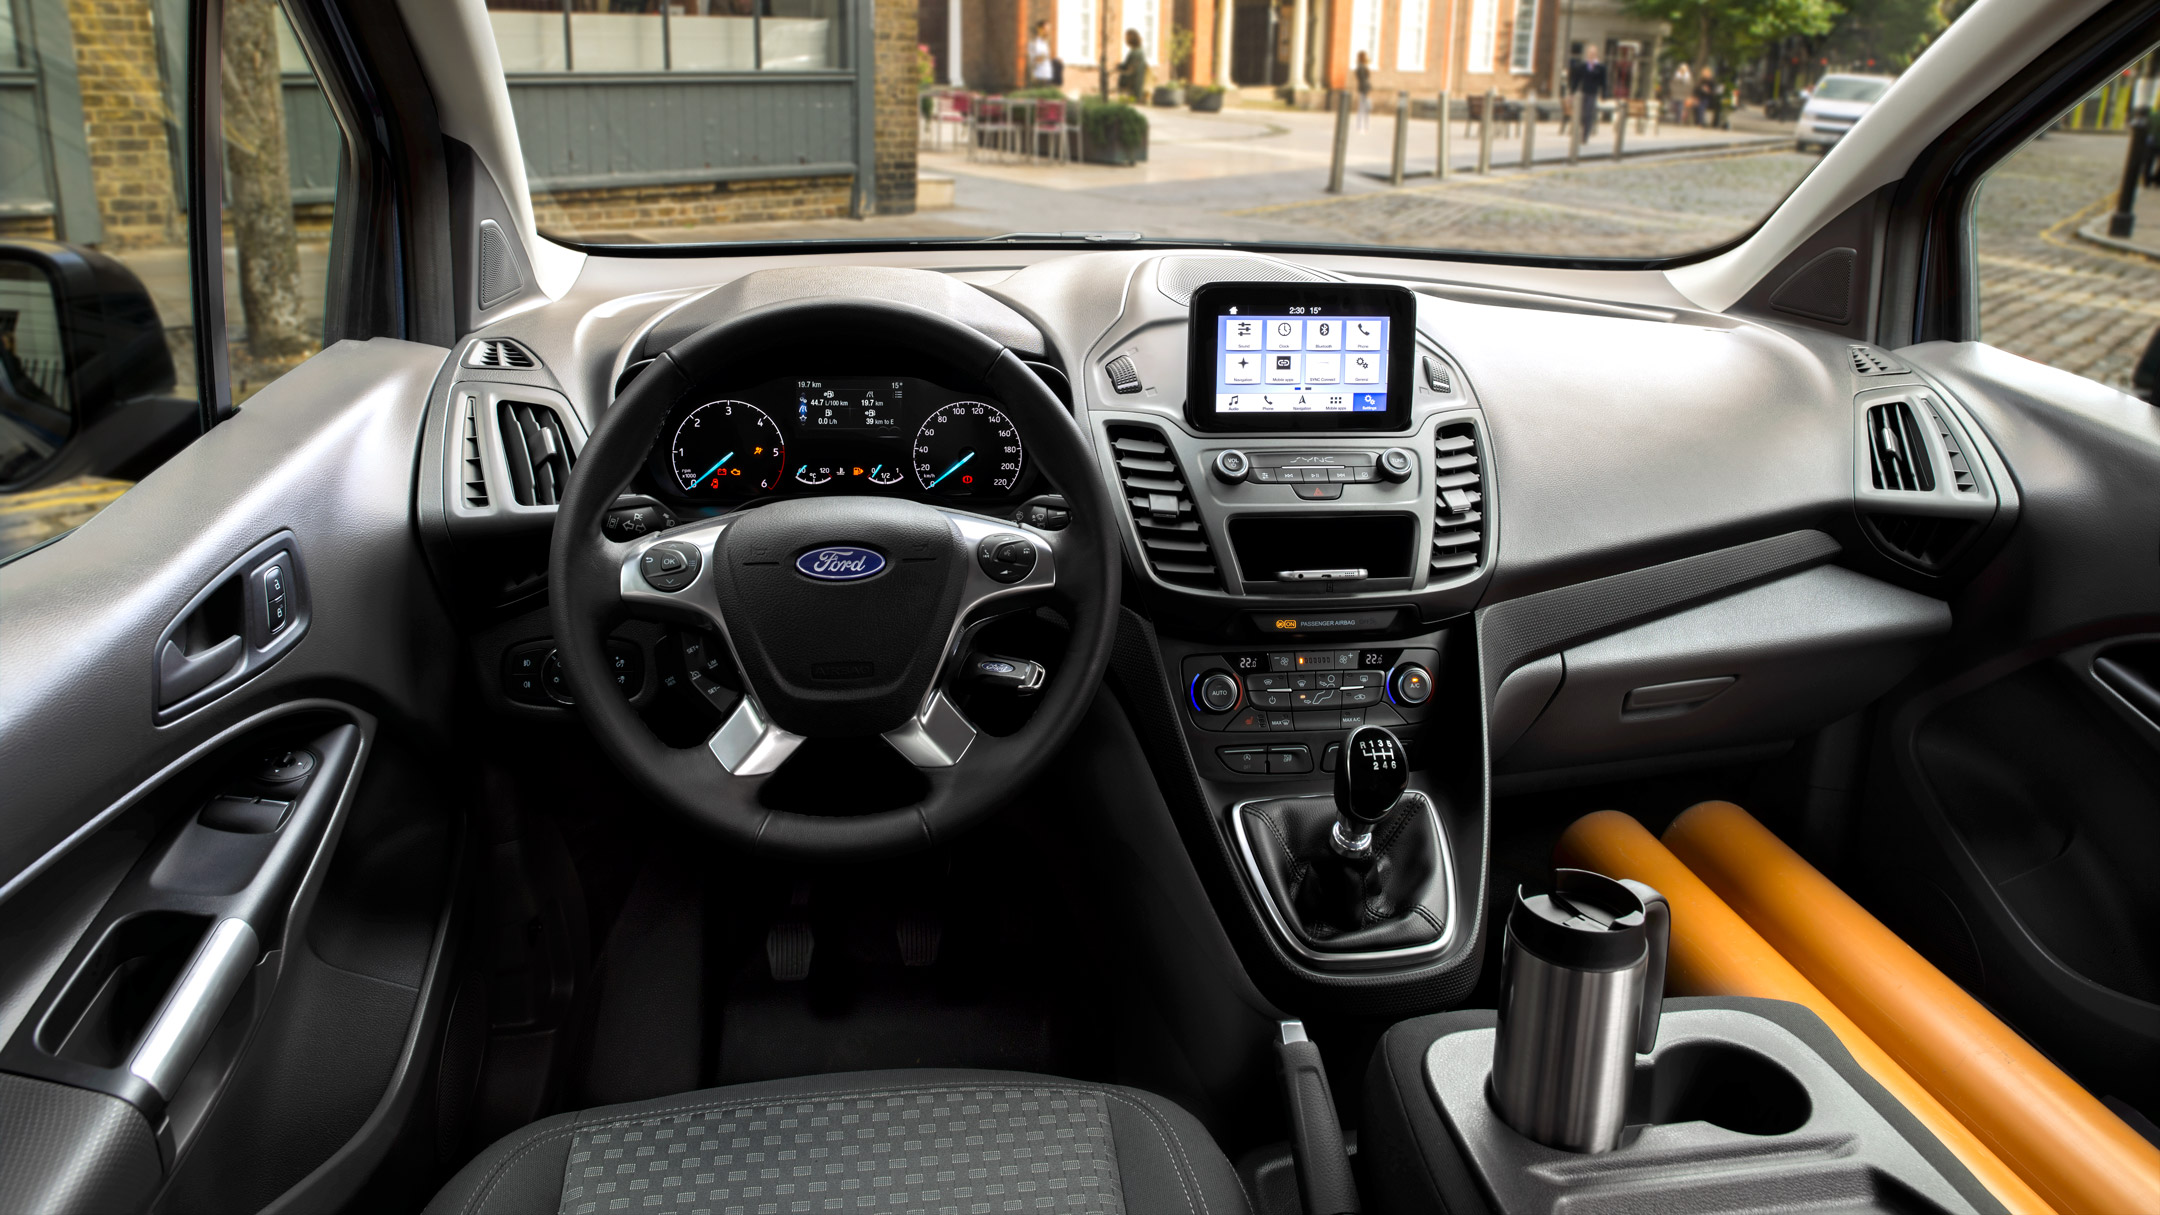 Ford Transit Connect interior with SYNC 3